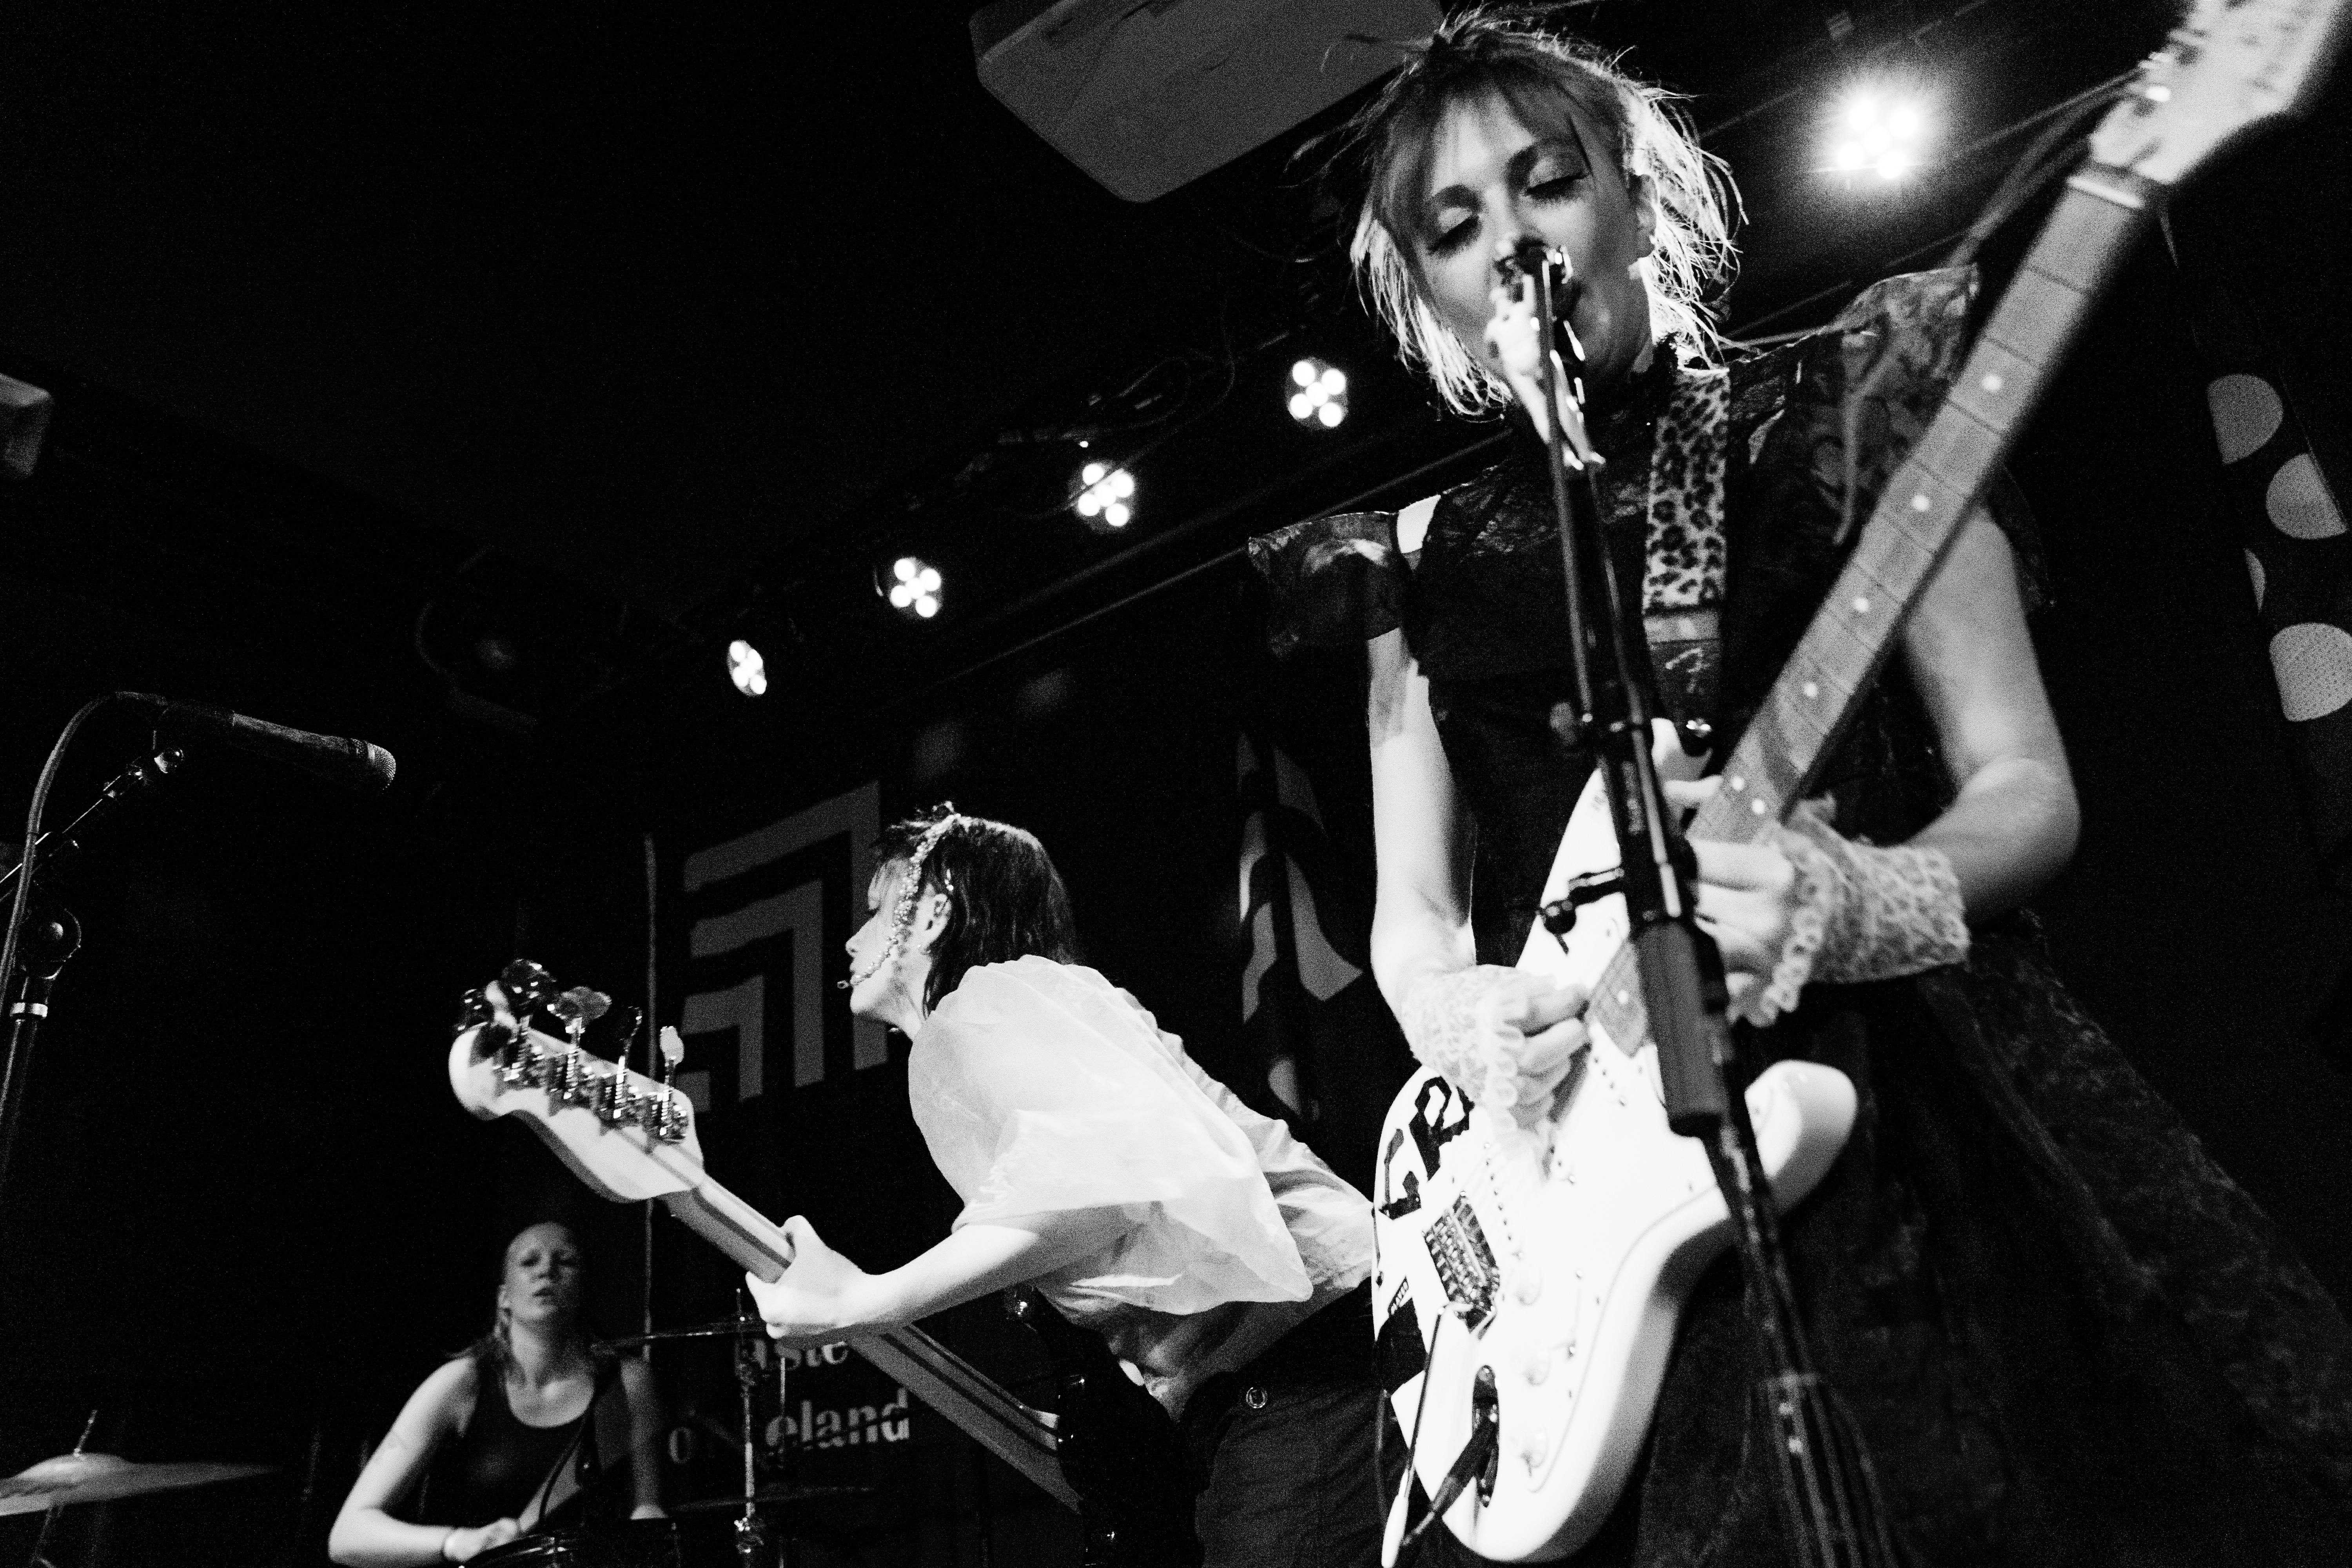 A black and white image of Icelandic punk trio GROA playing live